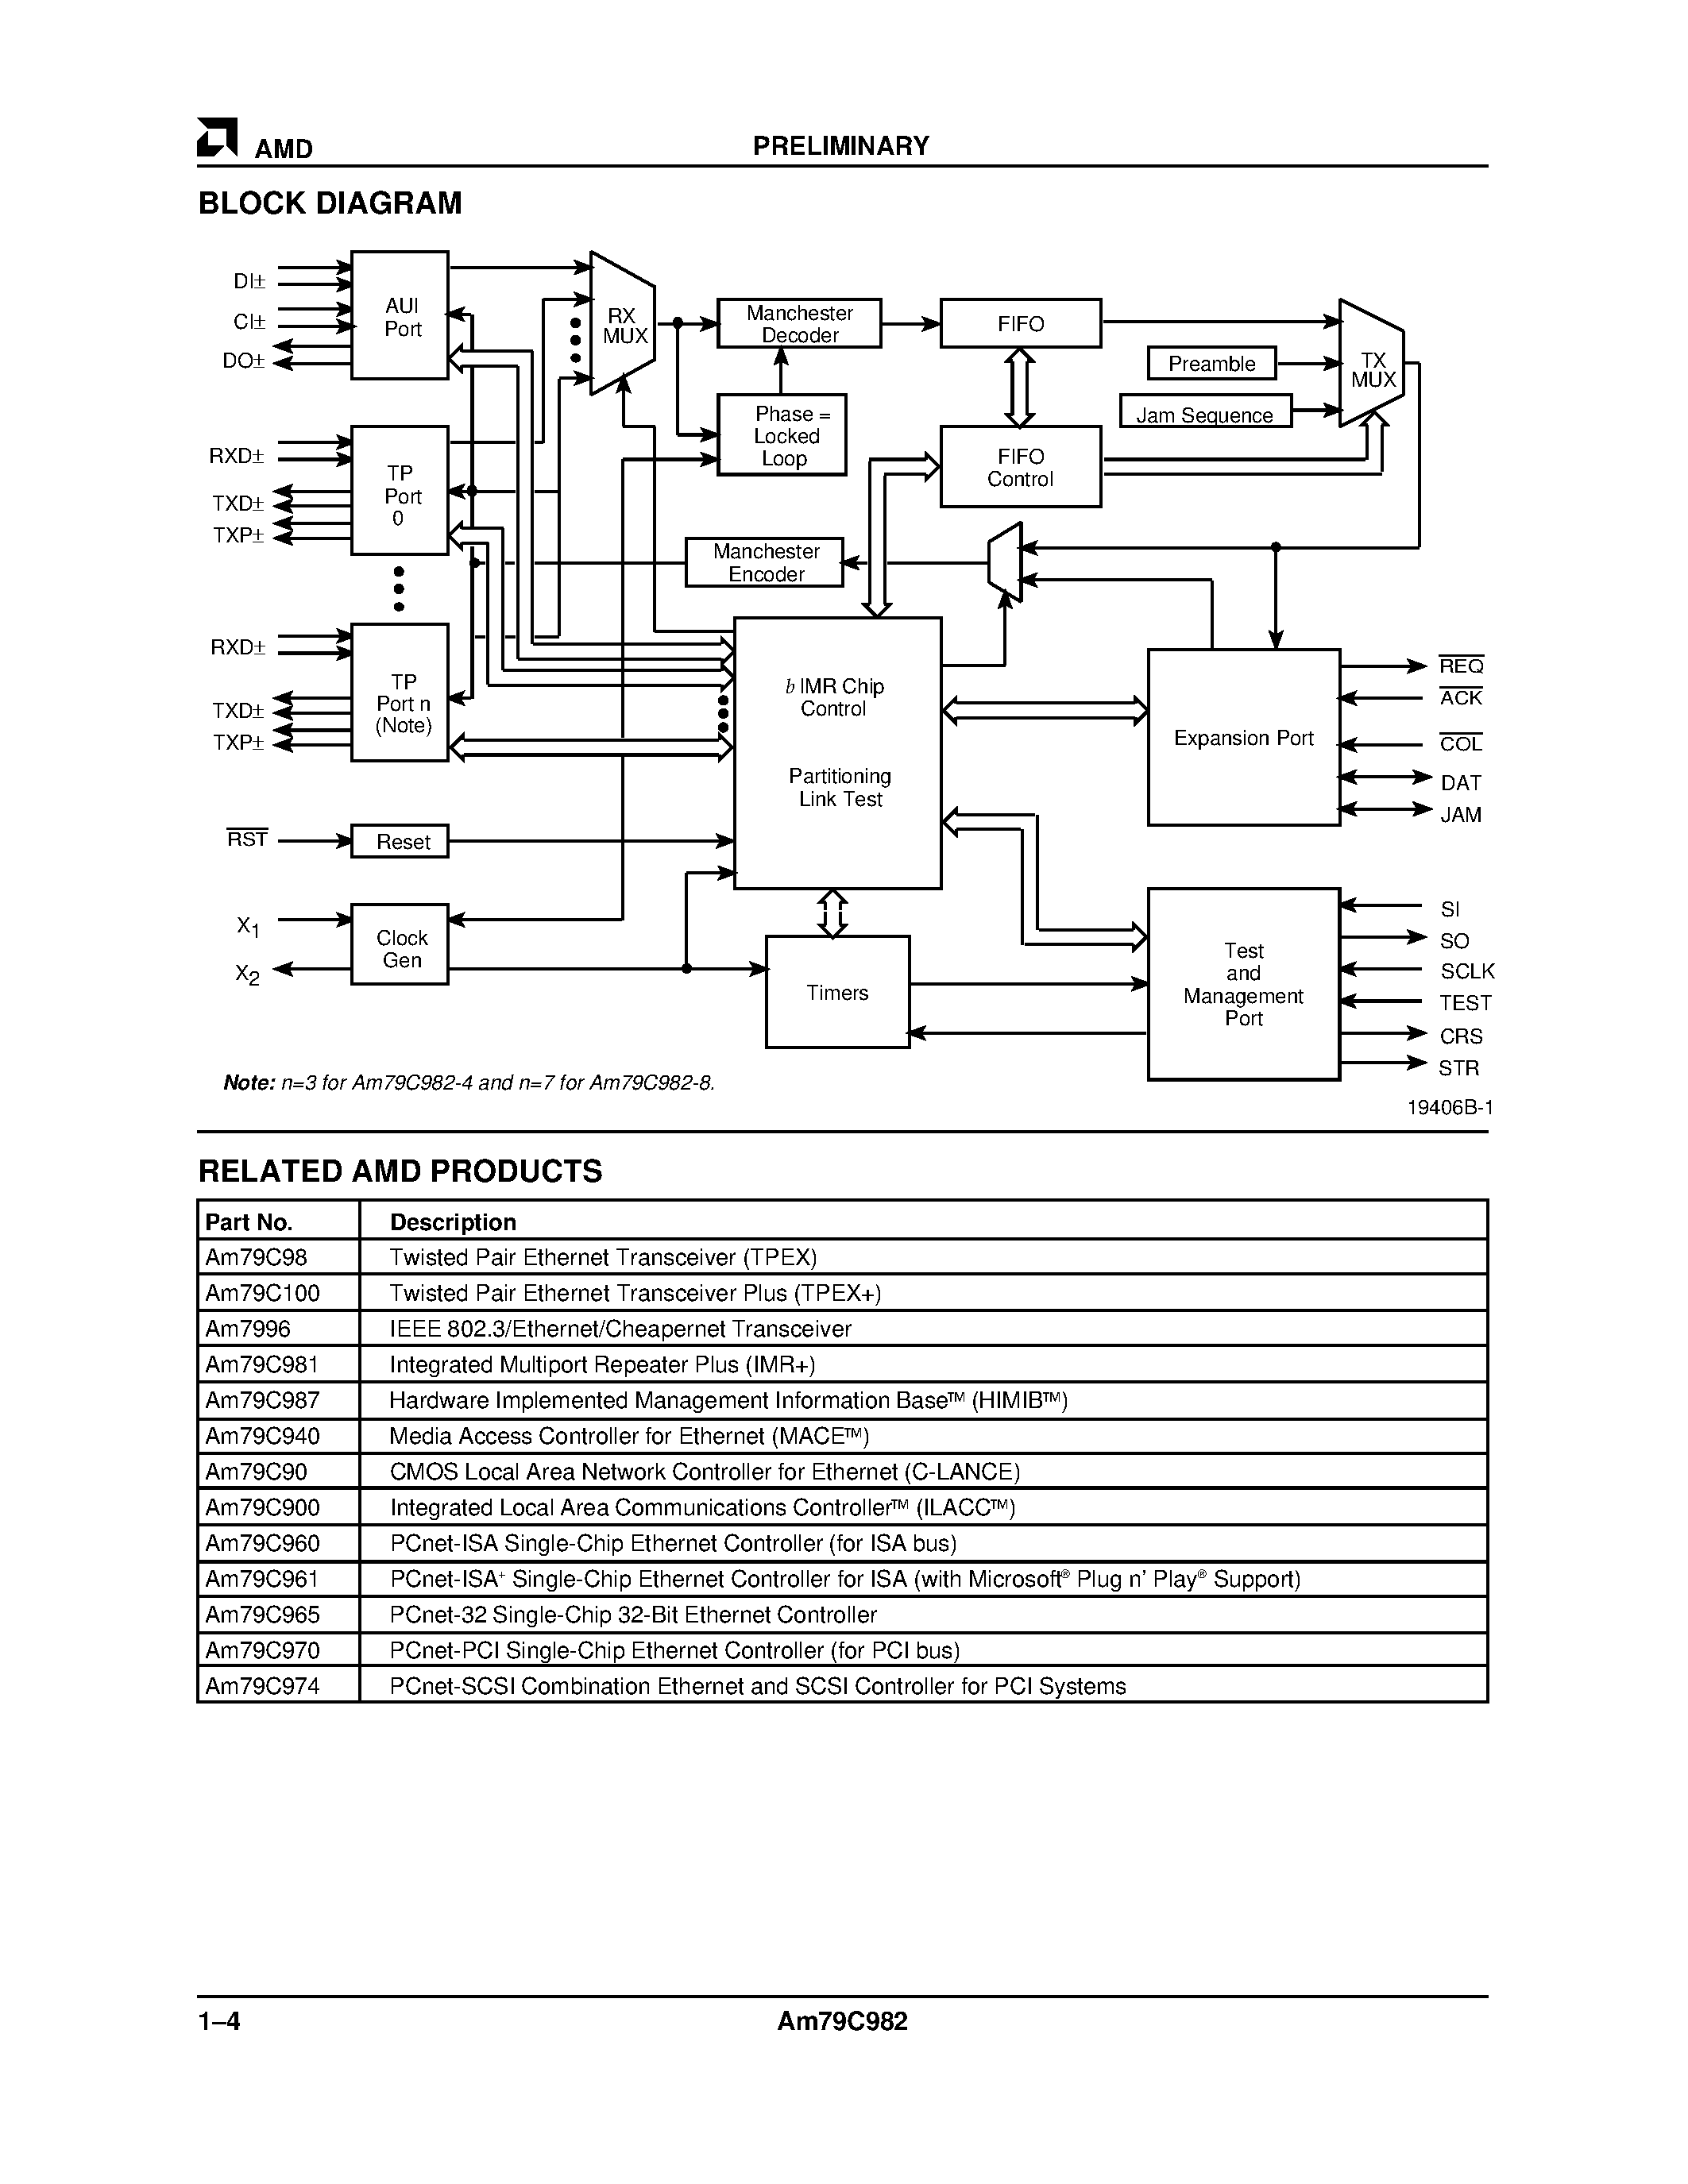 Datasheet Am79C982-4JC - basic Integrated Multiport Repeater (bIMR) page 2